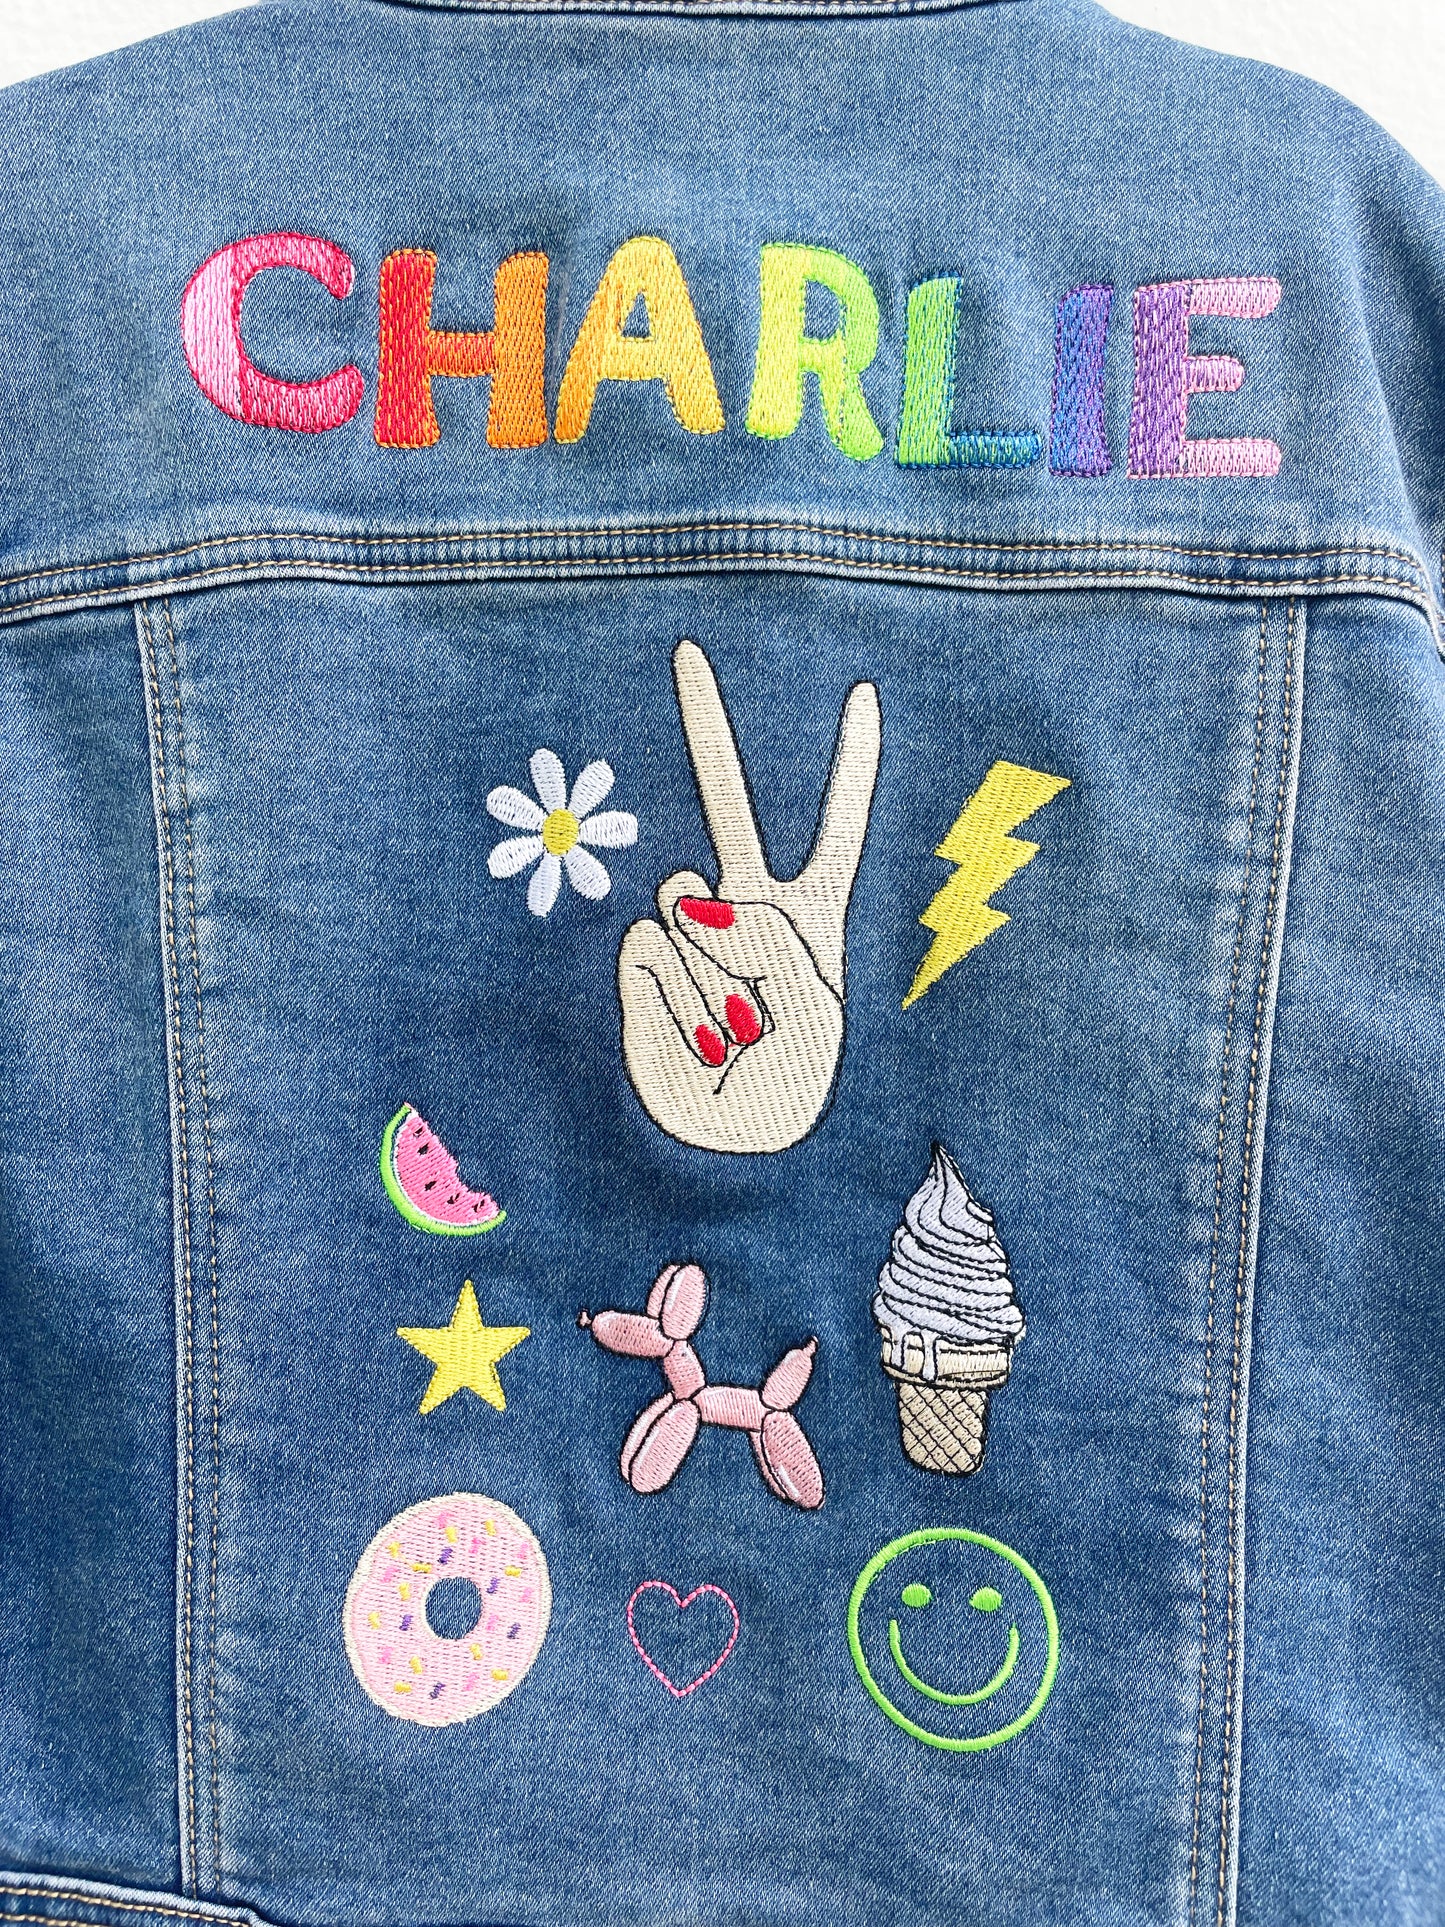 Jean Jacket  - Youth (machine embroidered)